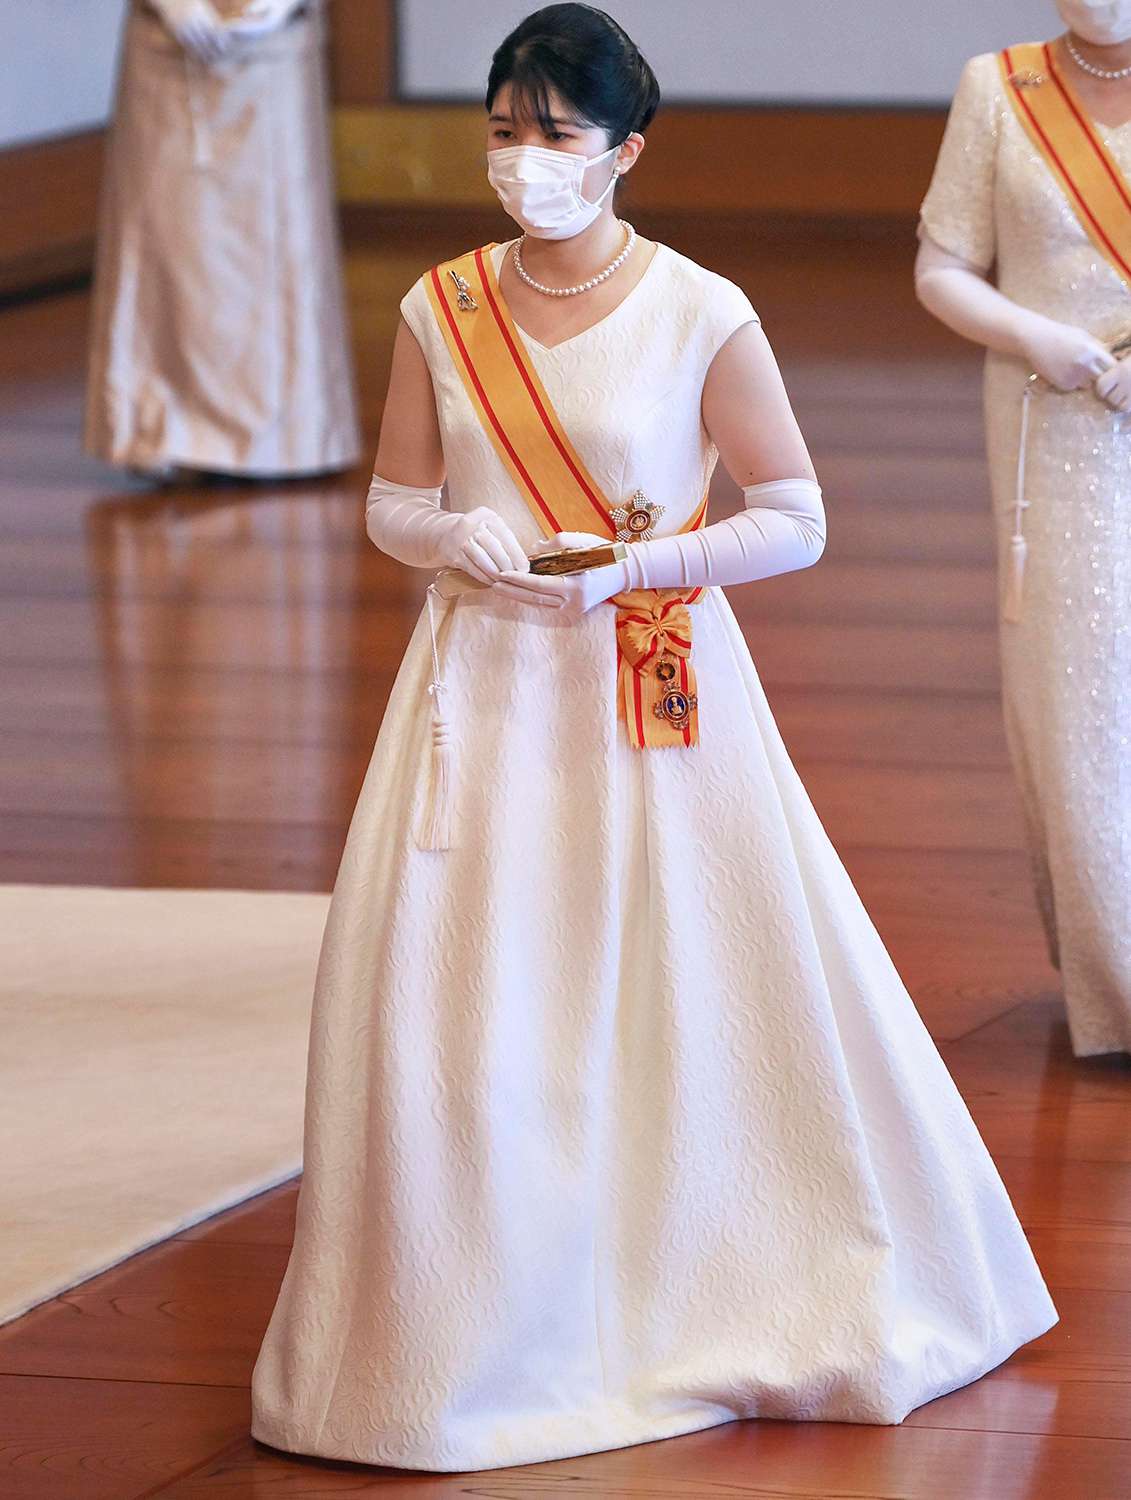 Princess Aiko of Japan Makes Royal Debut After Cousin Mako Leaves Imperial Family for N.Y.C.